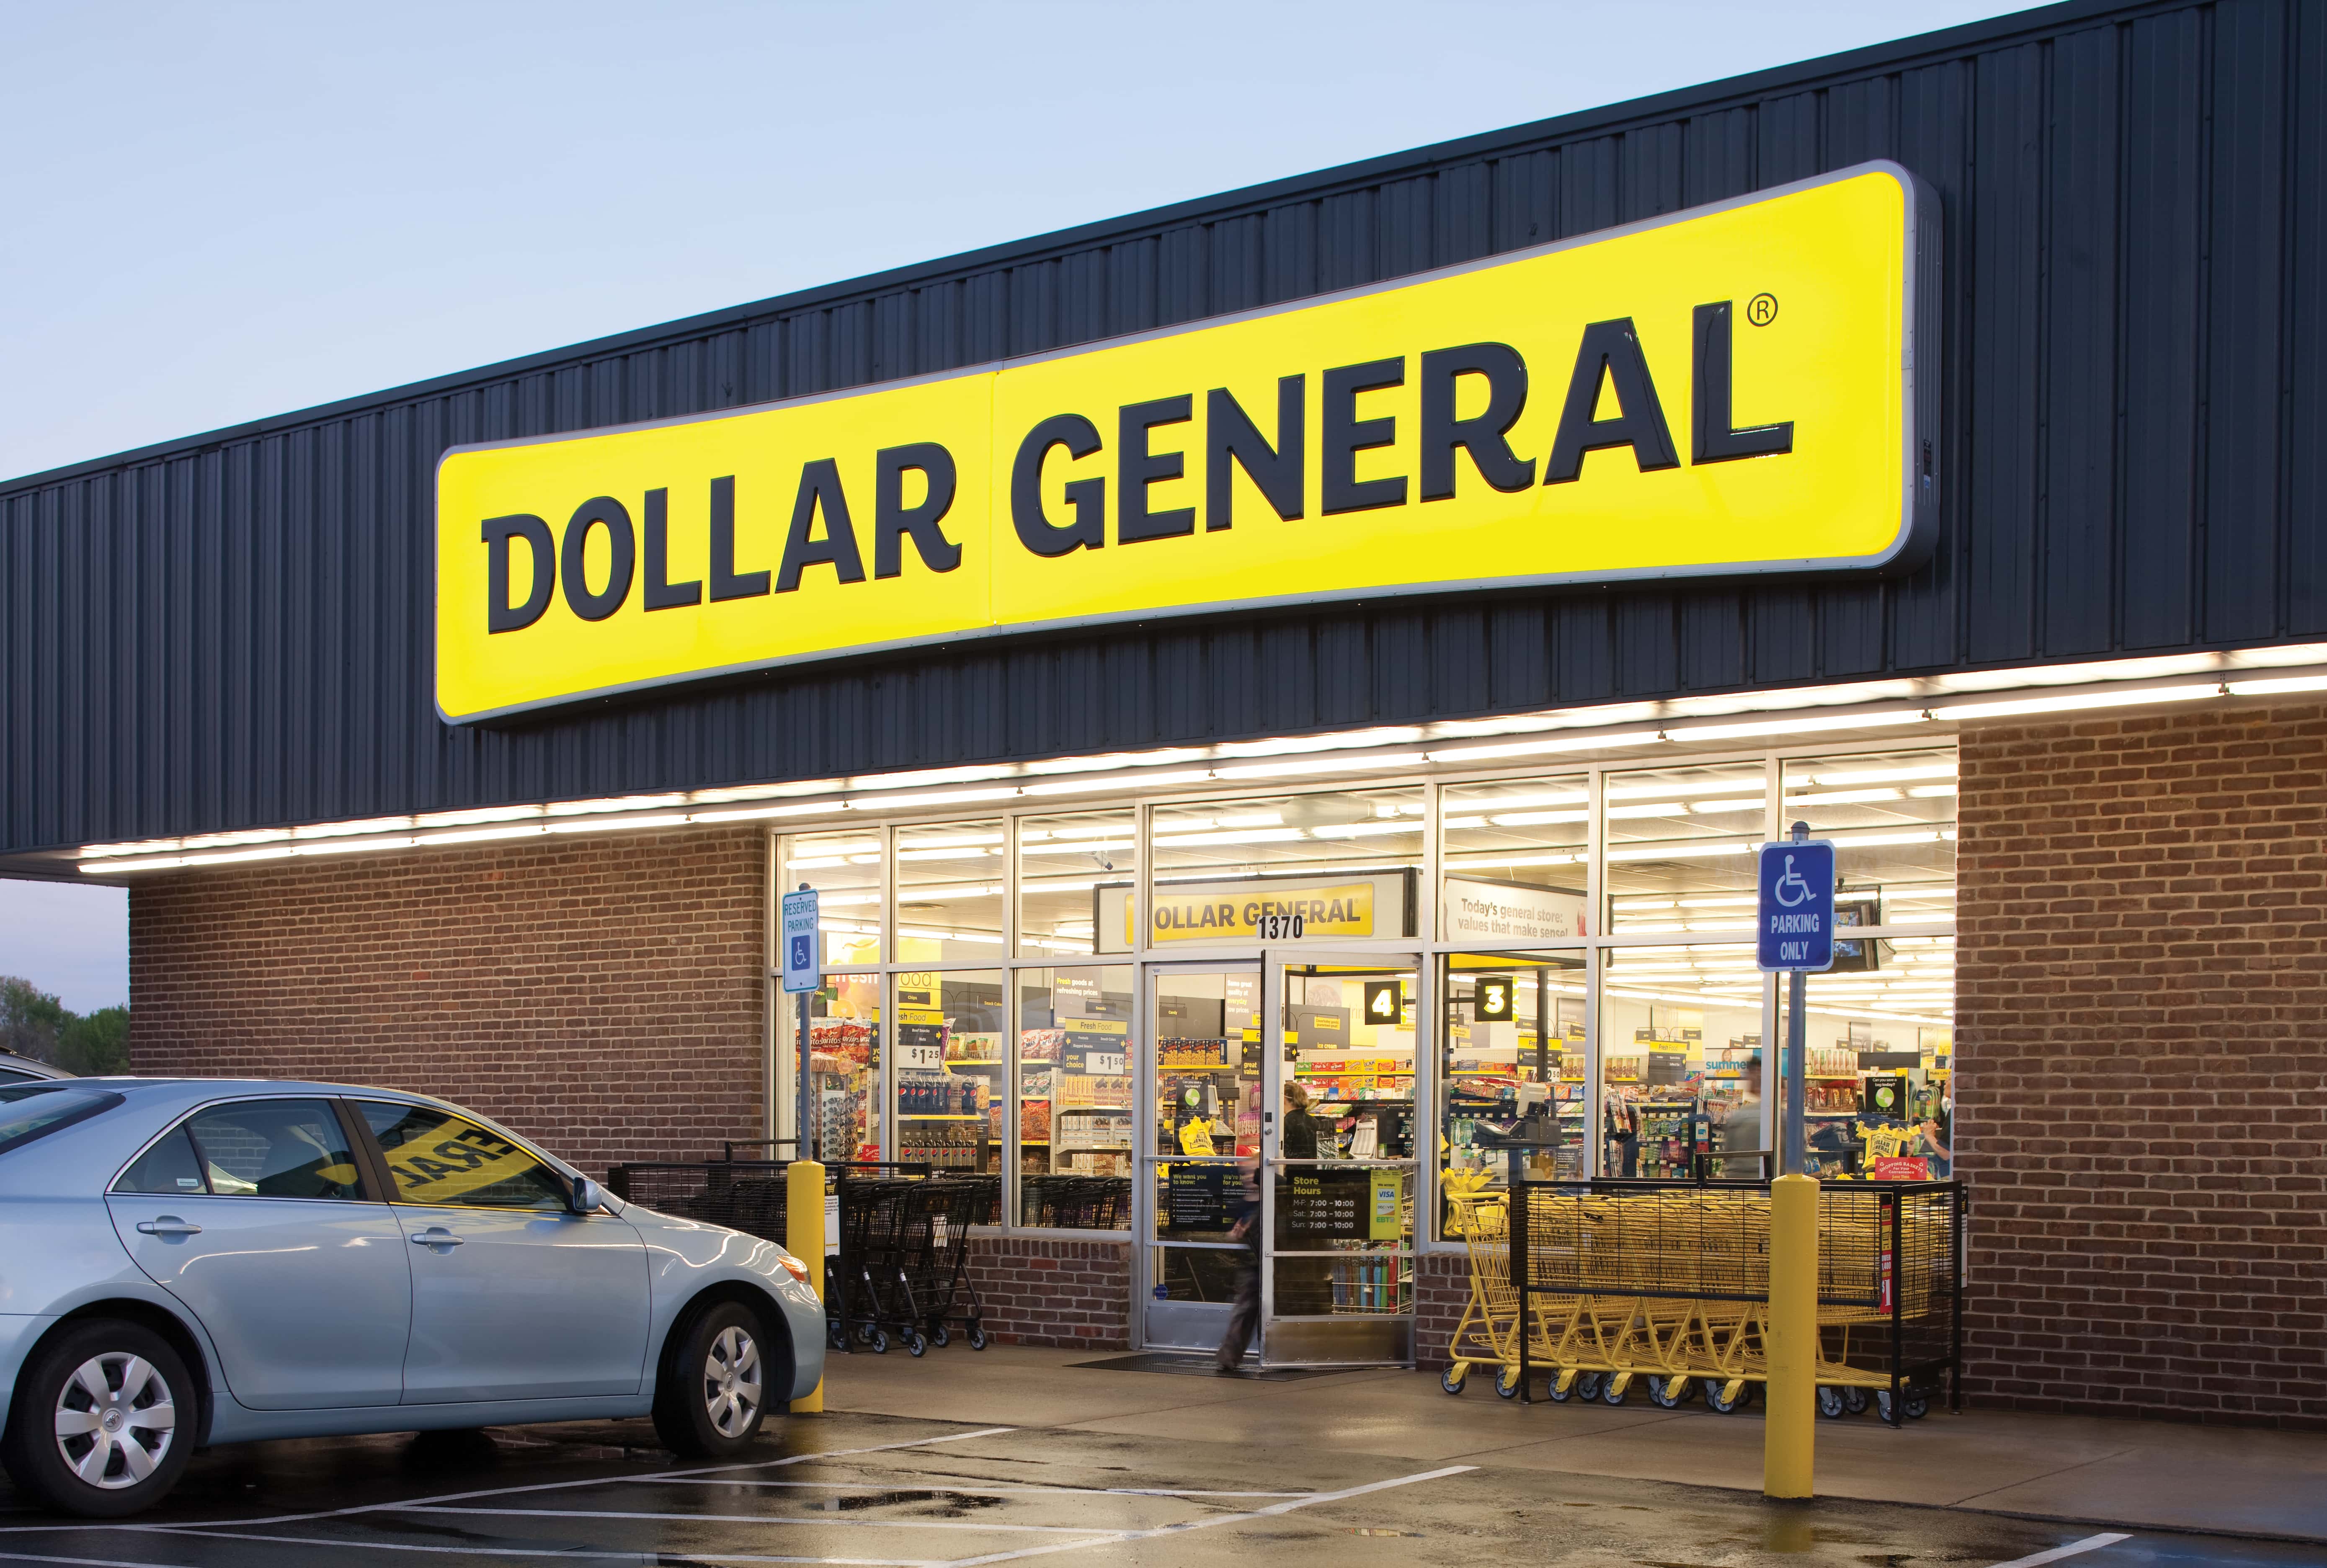 dollar-general-staffing-up-new-st-joseph-store-other-local-locations